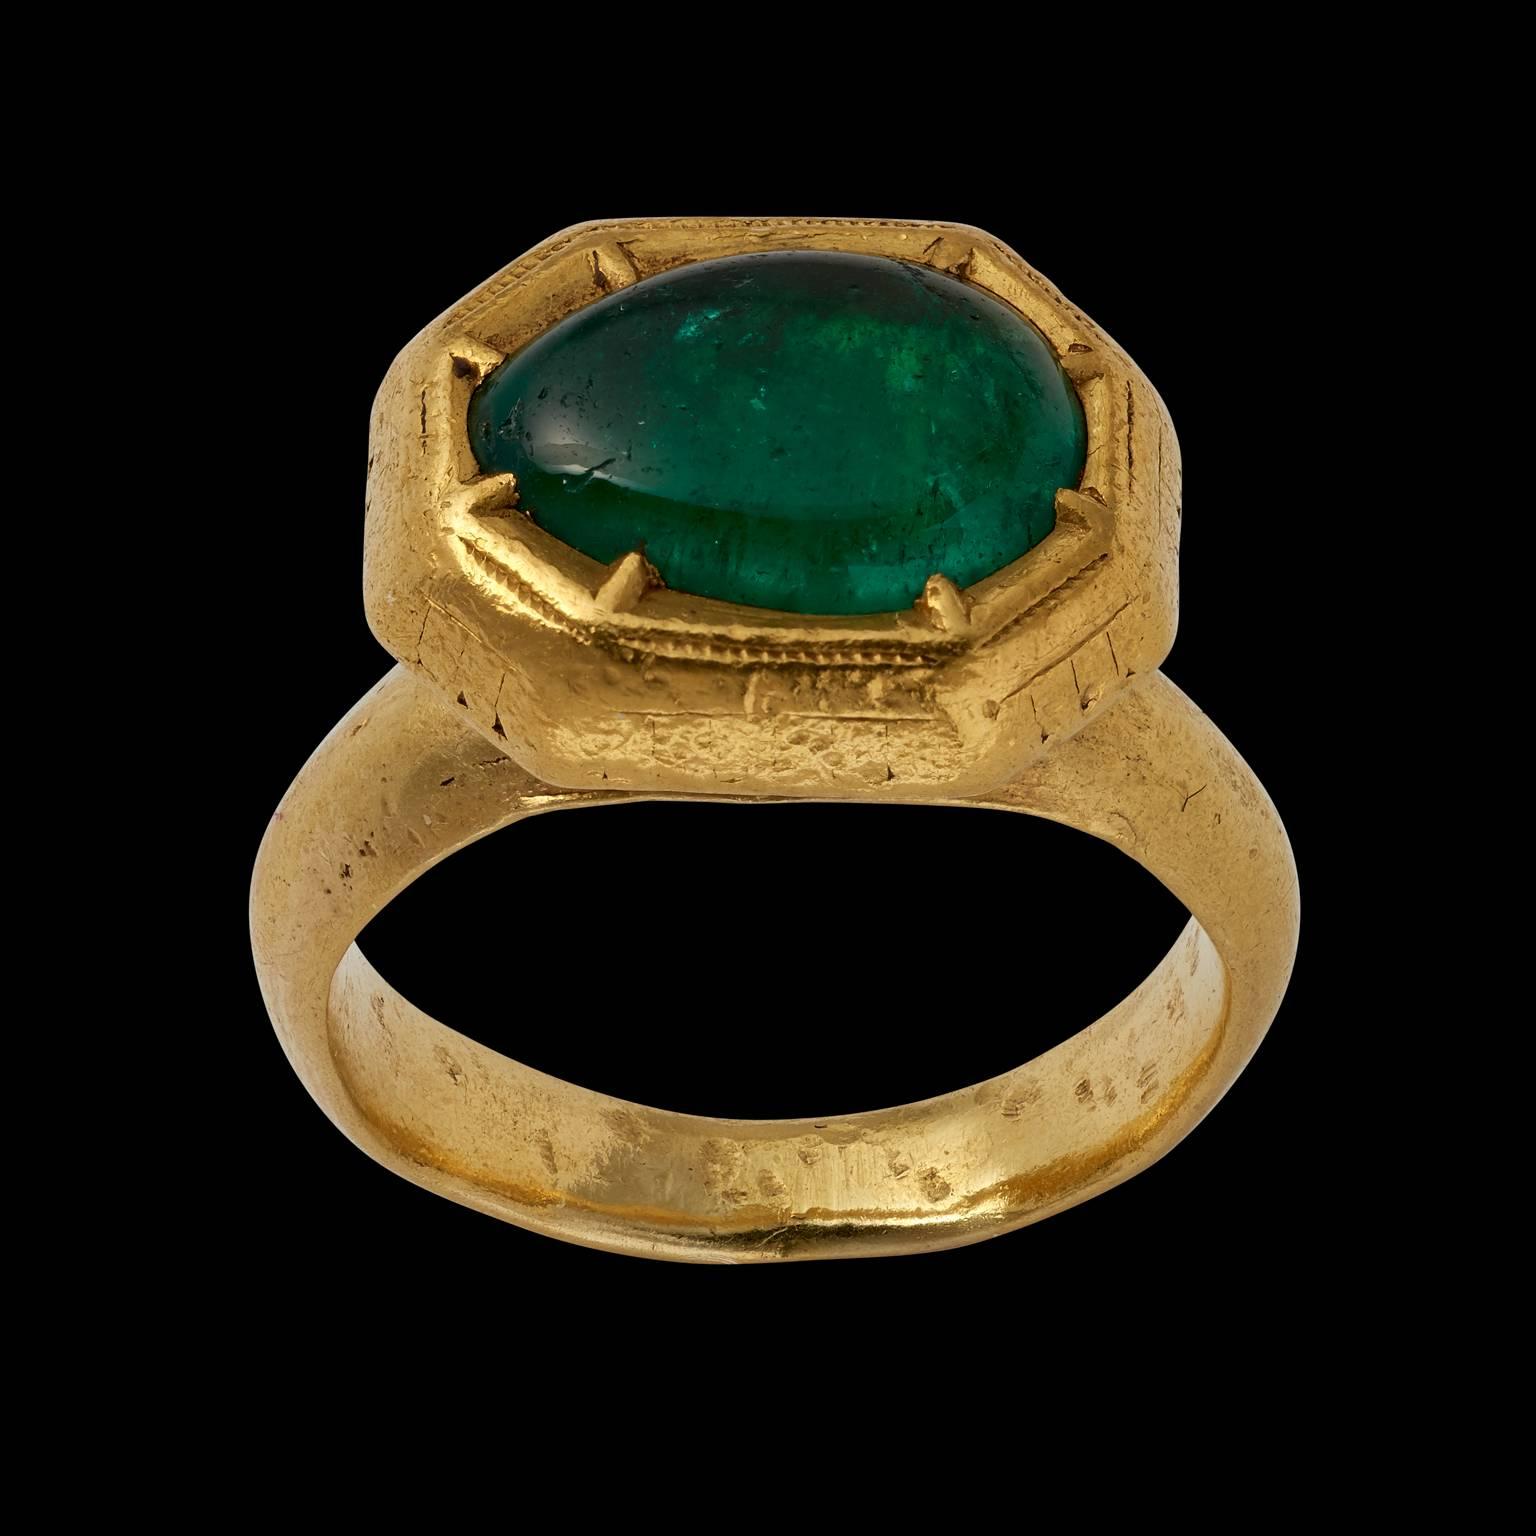 Ring
Deccan, South India
18th / 19th century

Pure gold with a central cabouchon Colombian emerald.

UK finger size K